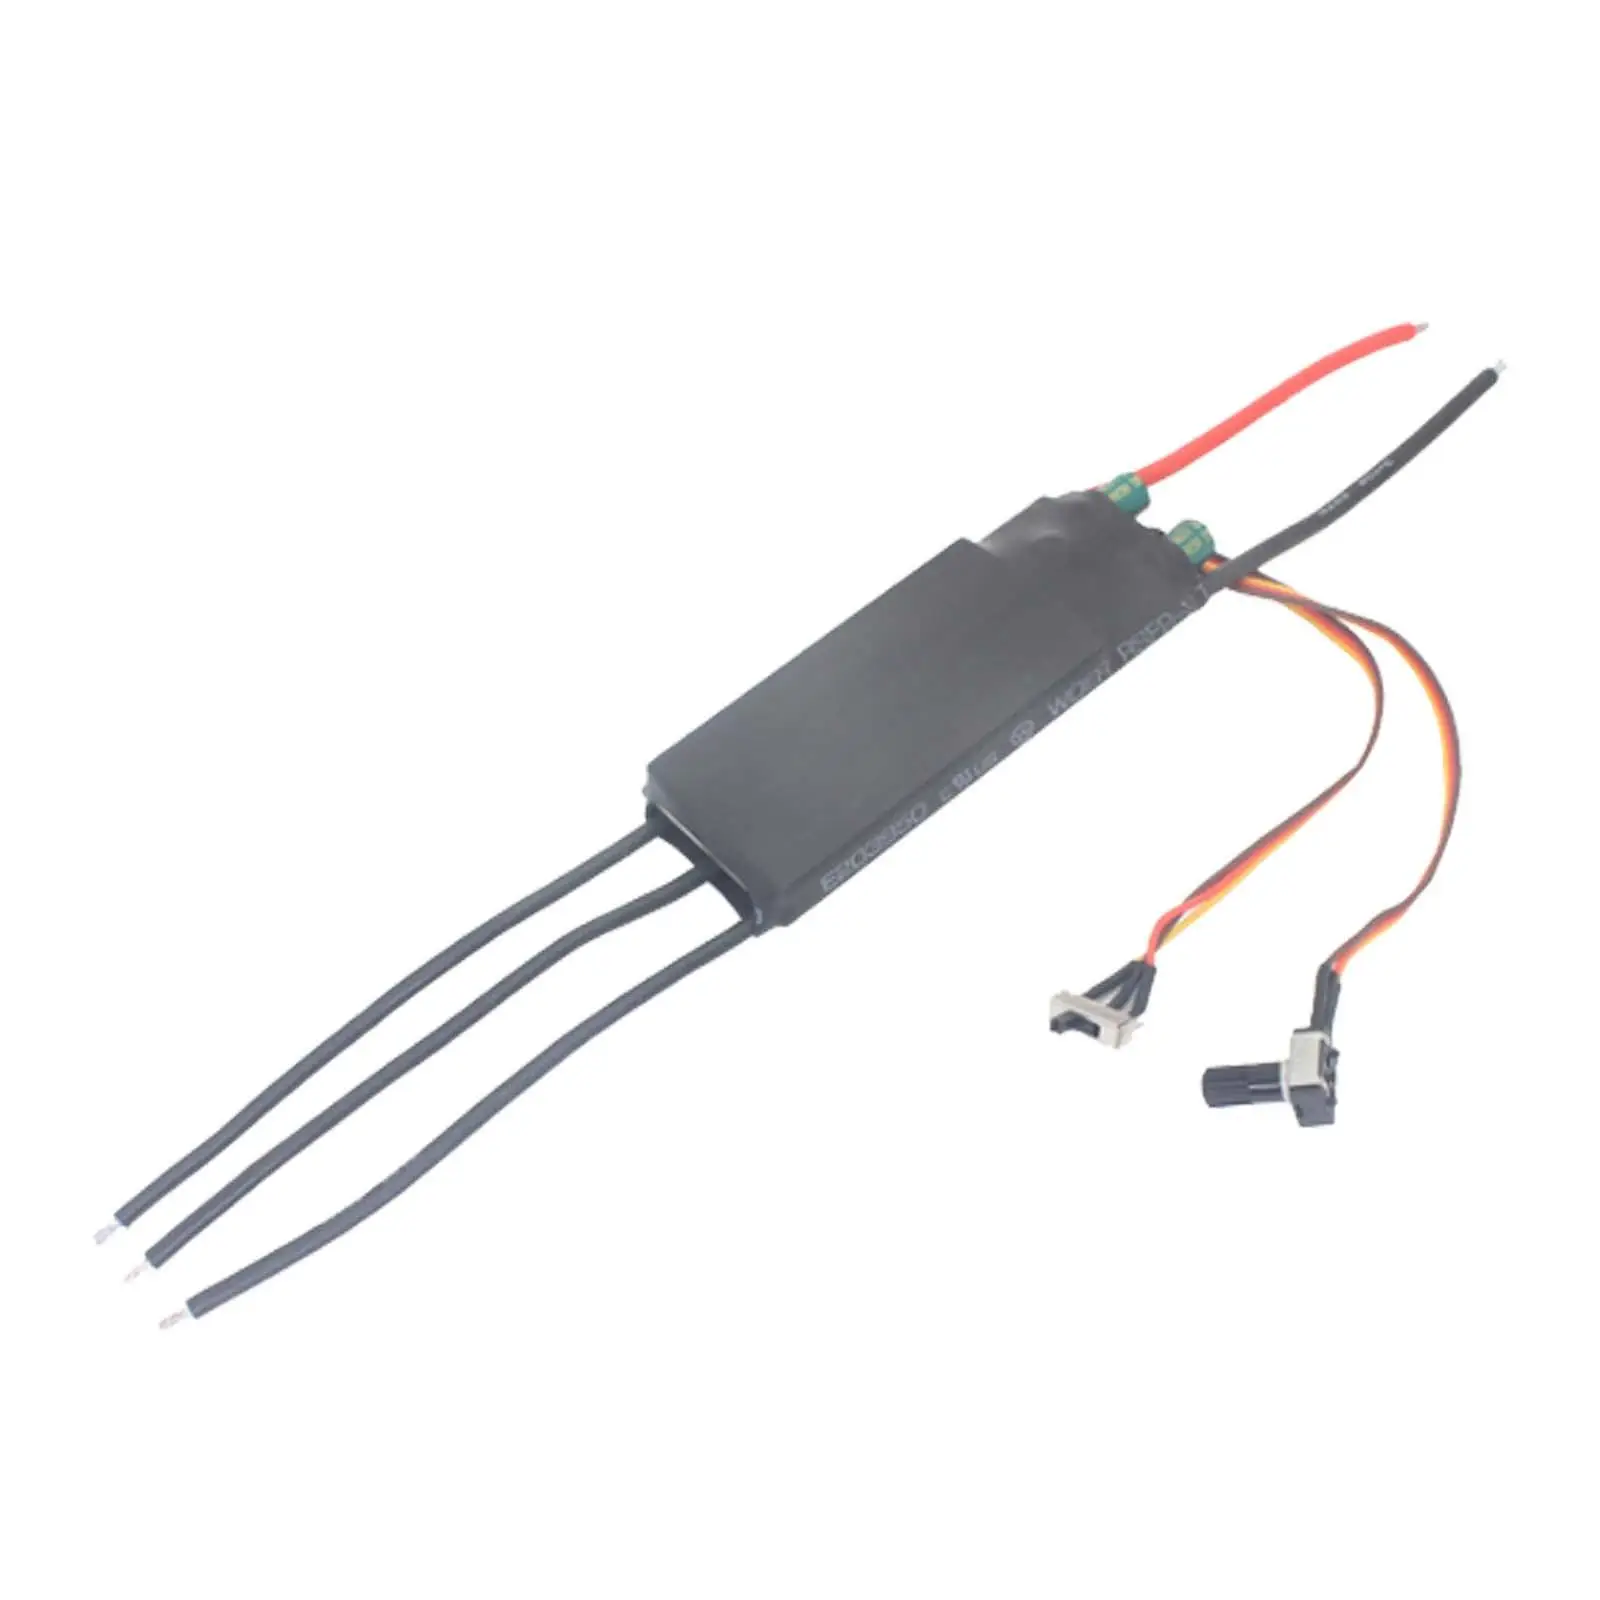 Motor Speed Controller 3 Phase Bldc Controller Brushless Hallless Motor for Water Pumps Fans Air Pumps Oil Pumps Parts